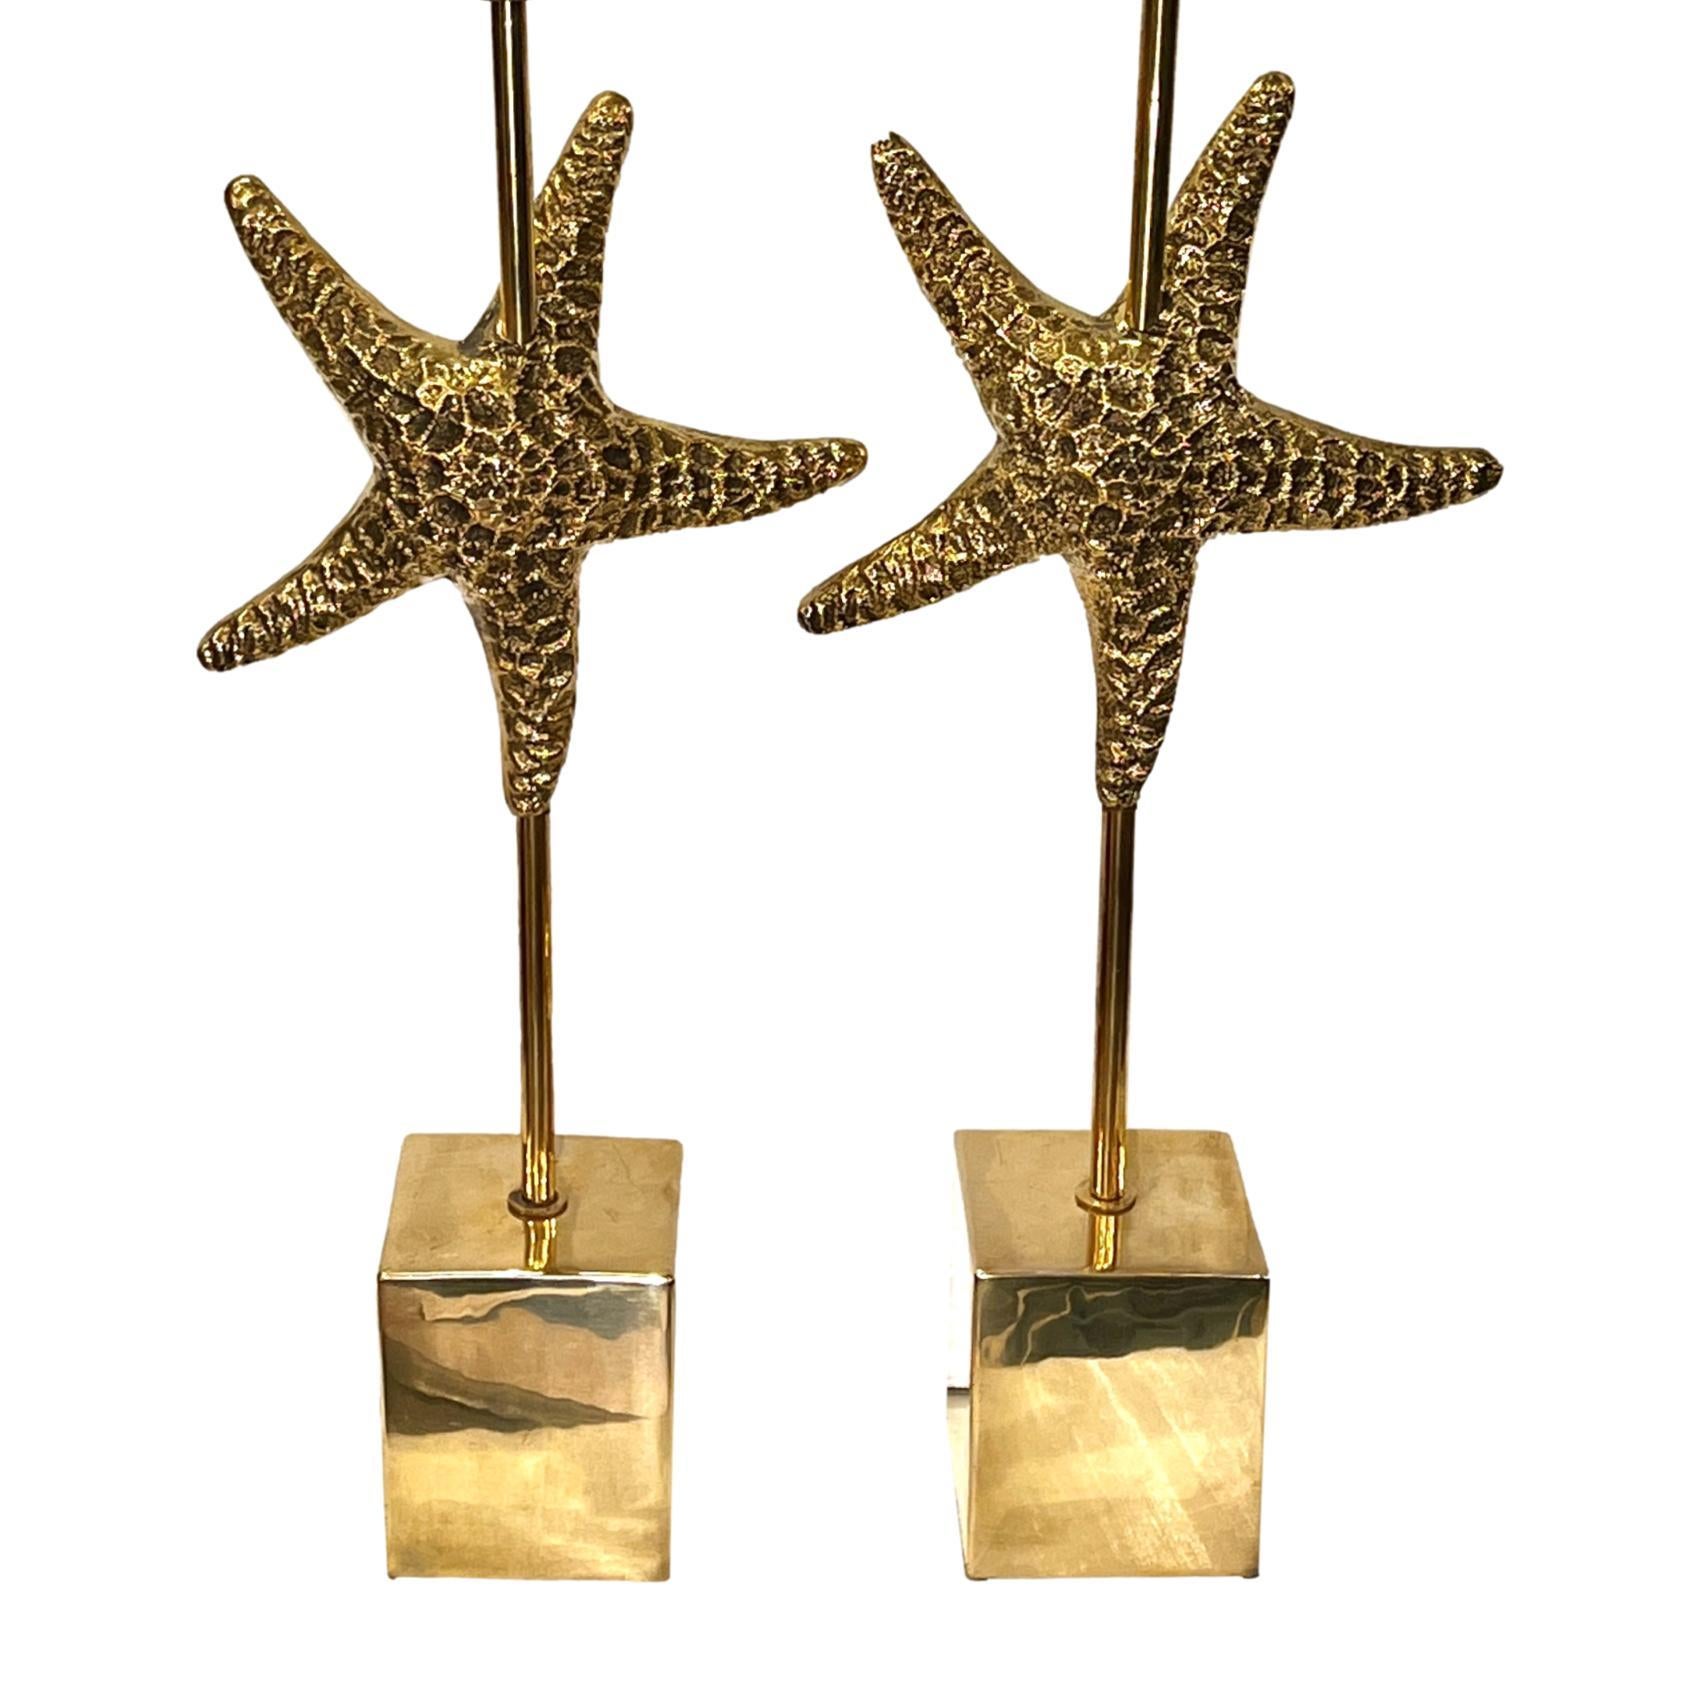 Pair of circa 1960's Italian polished bronze starfish lamps.

Measurements:
Height of body: 22